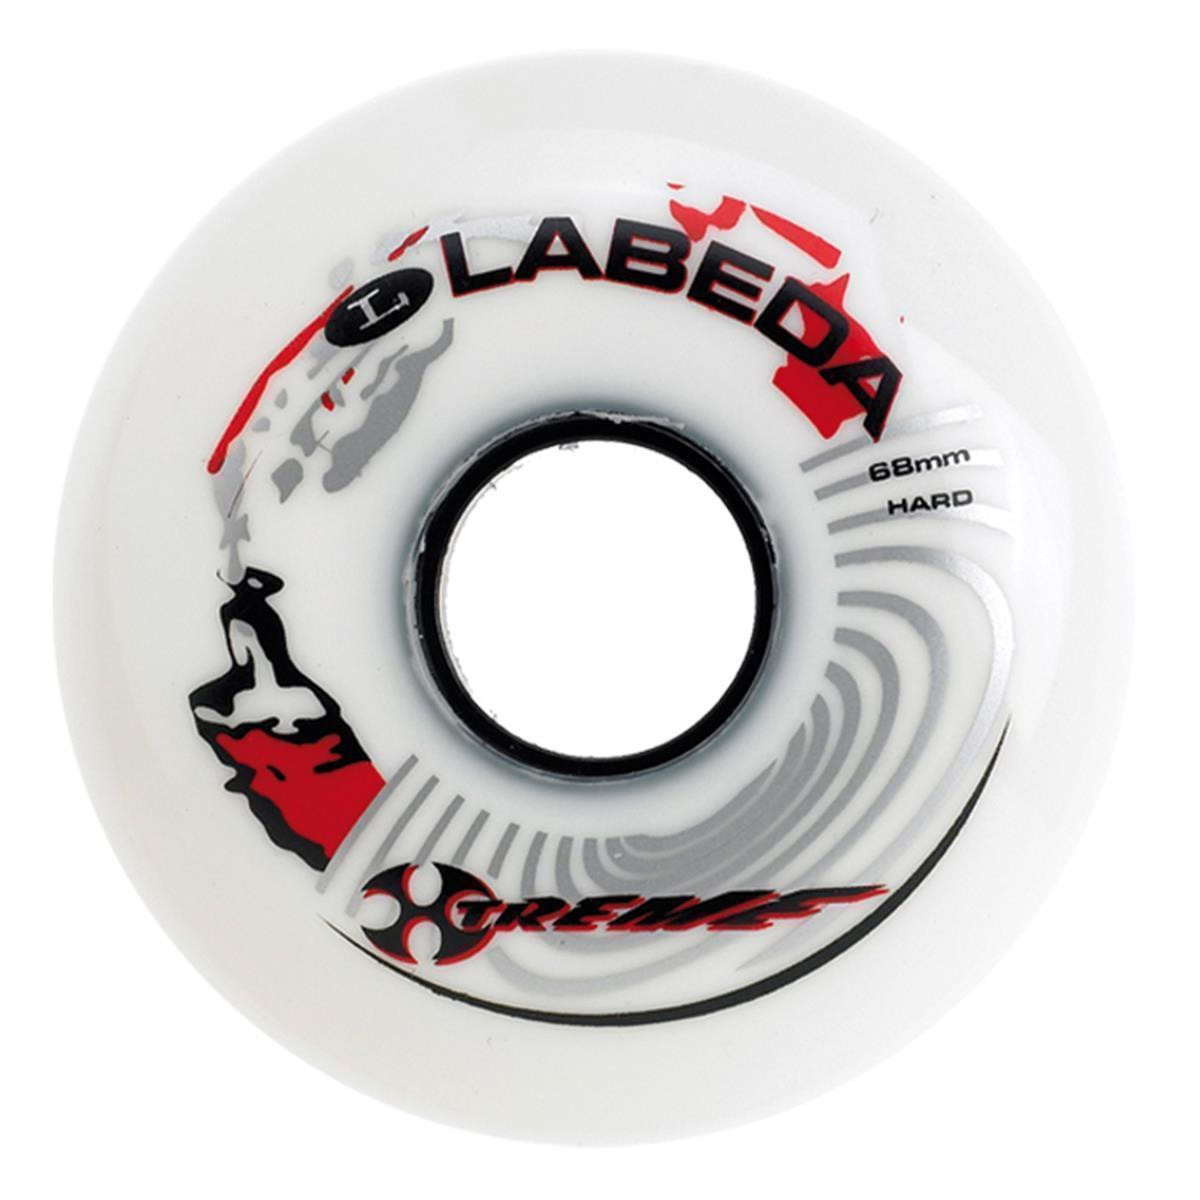 LABEDA Inline Rolle "Gripper Extreme" hard